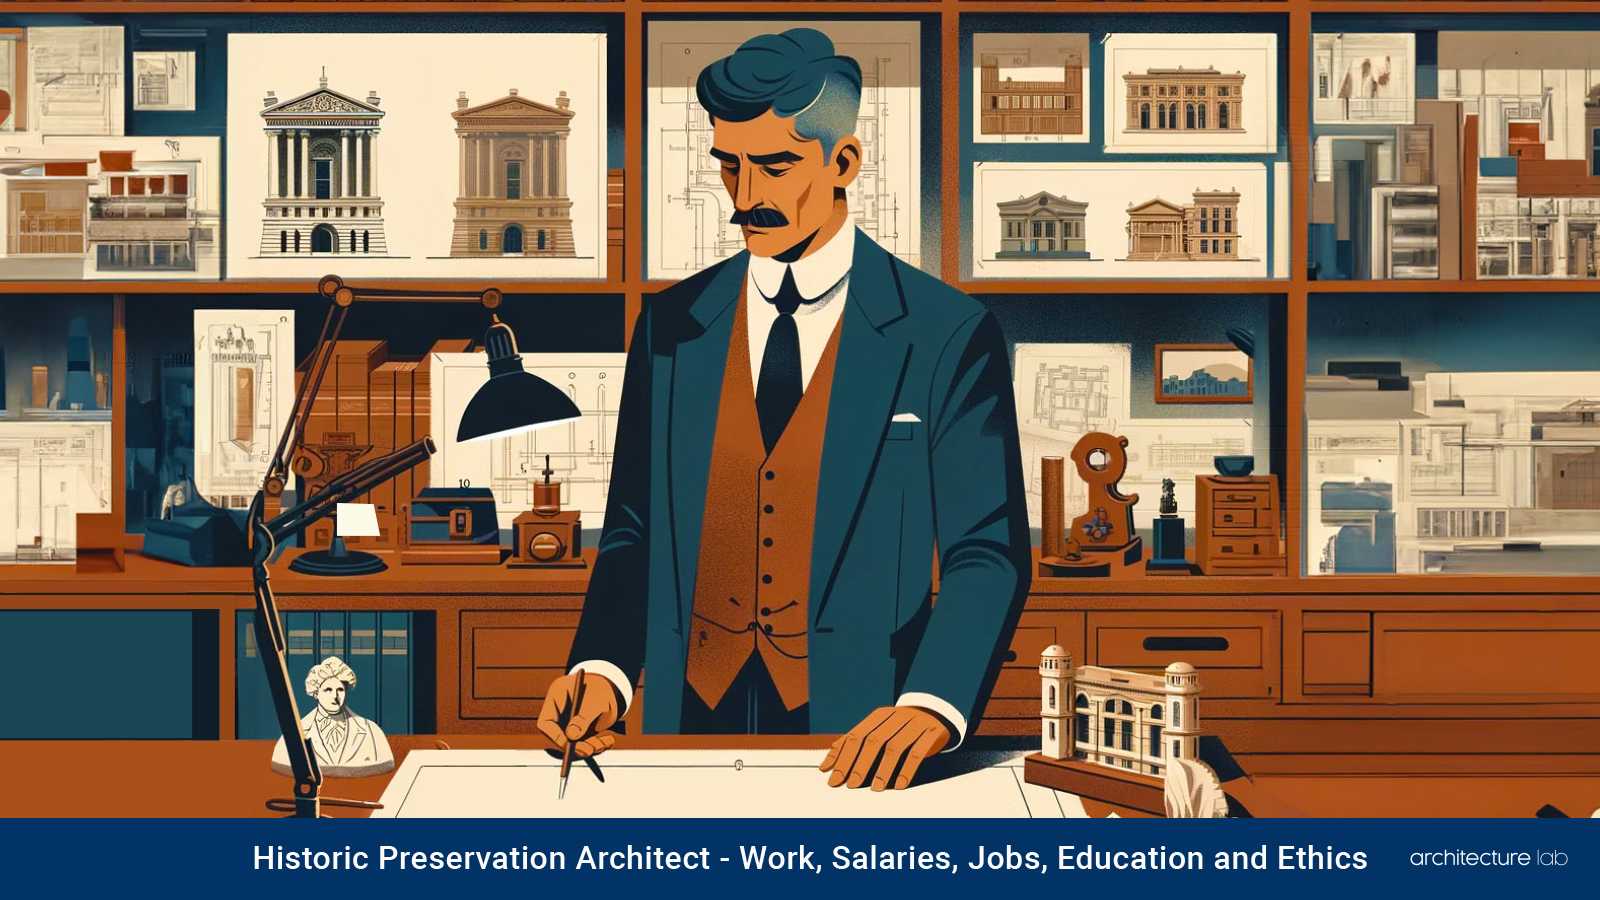 Historic preservation architect: work, salaries, jobs, education and ethics